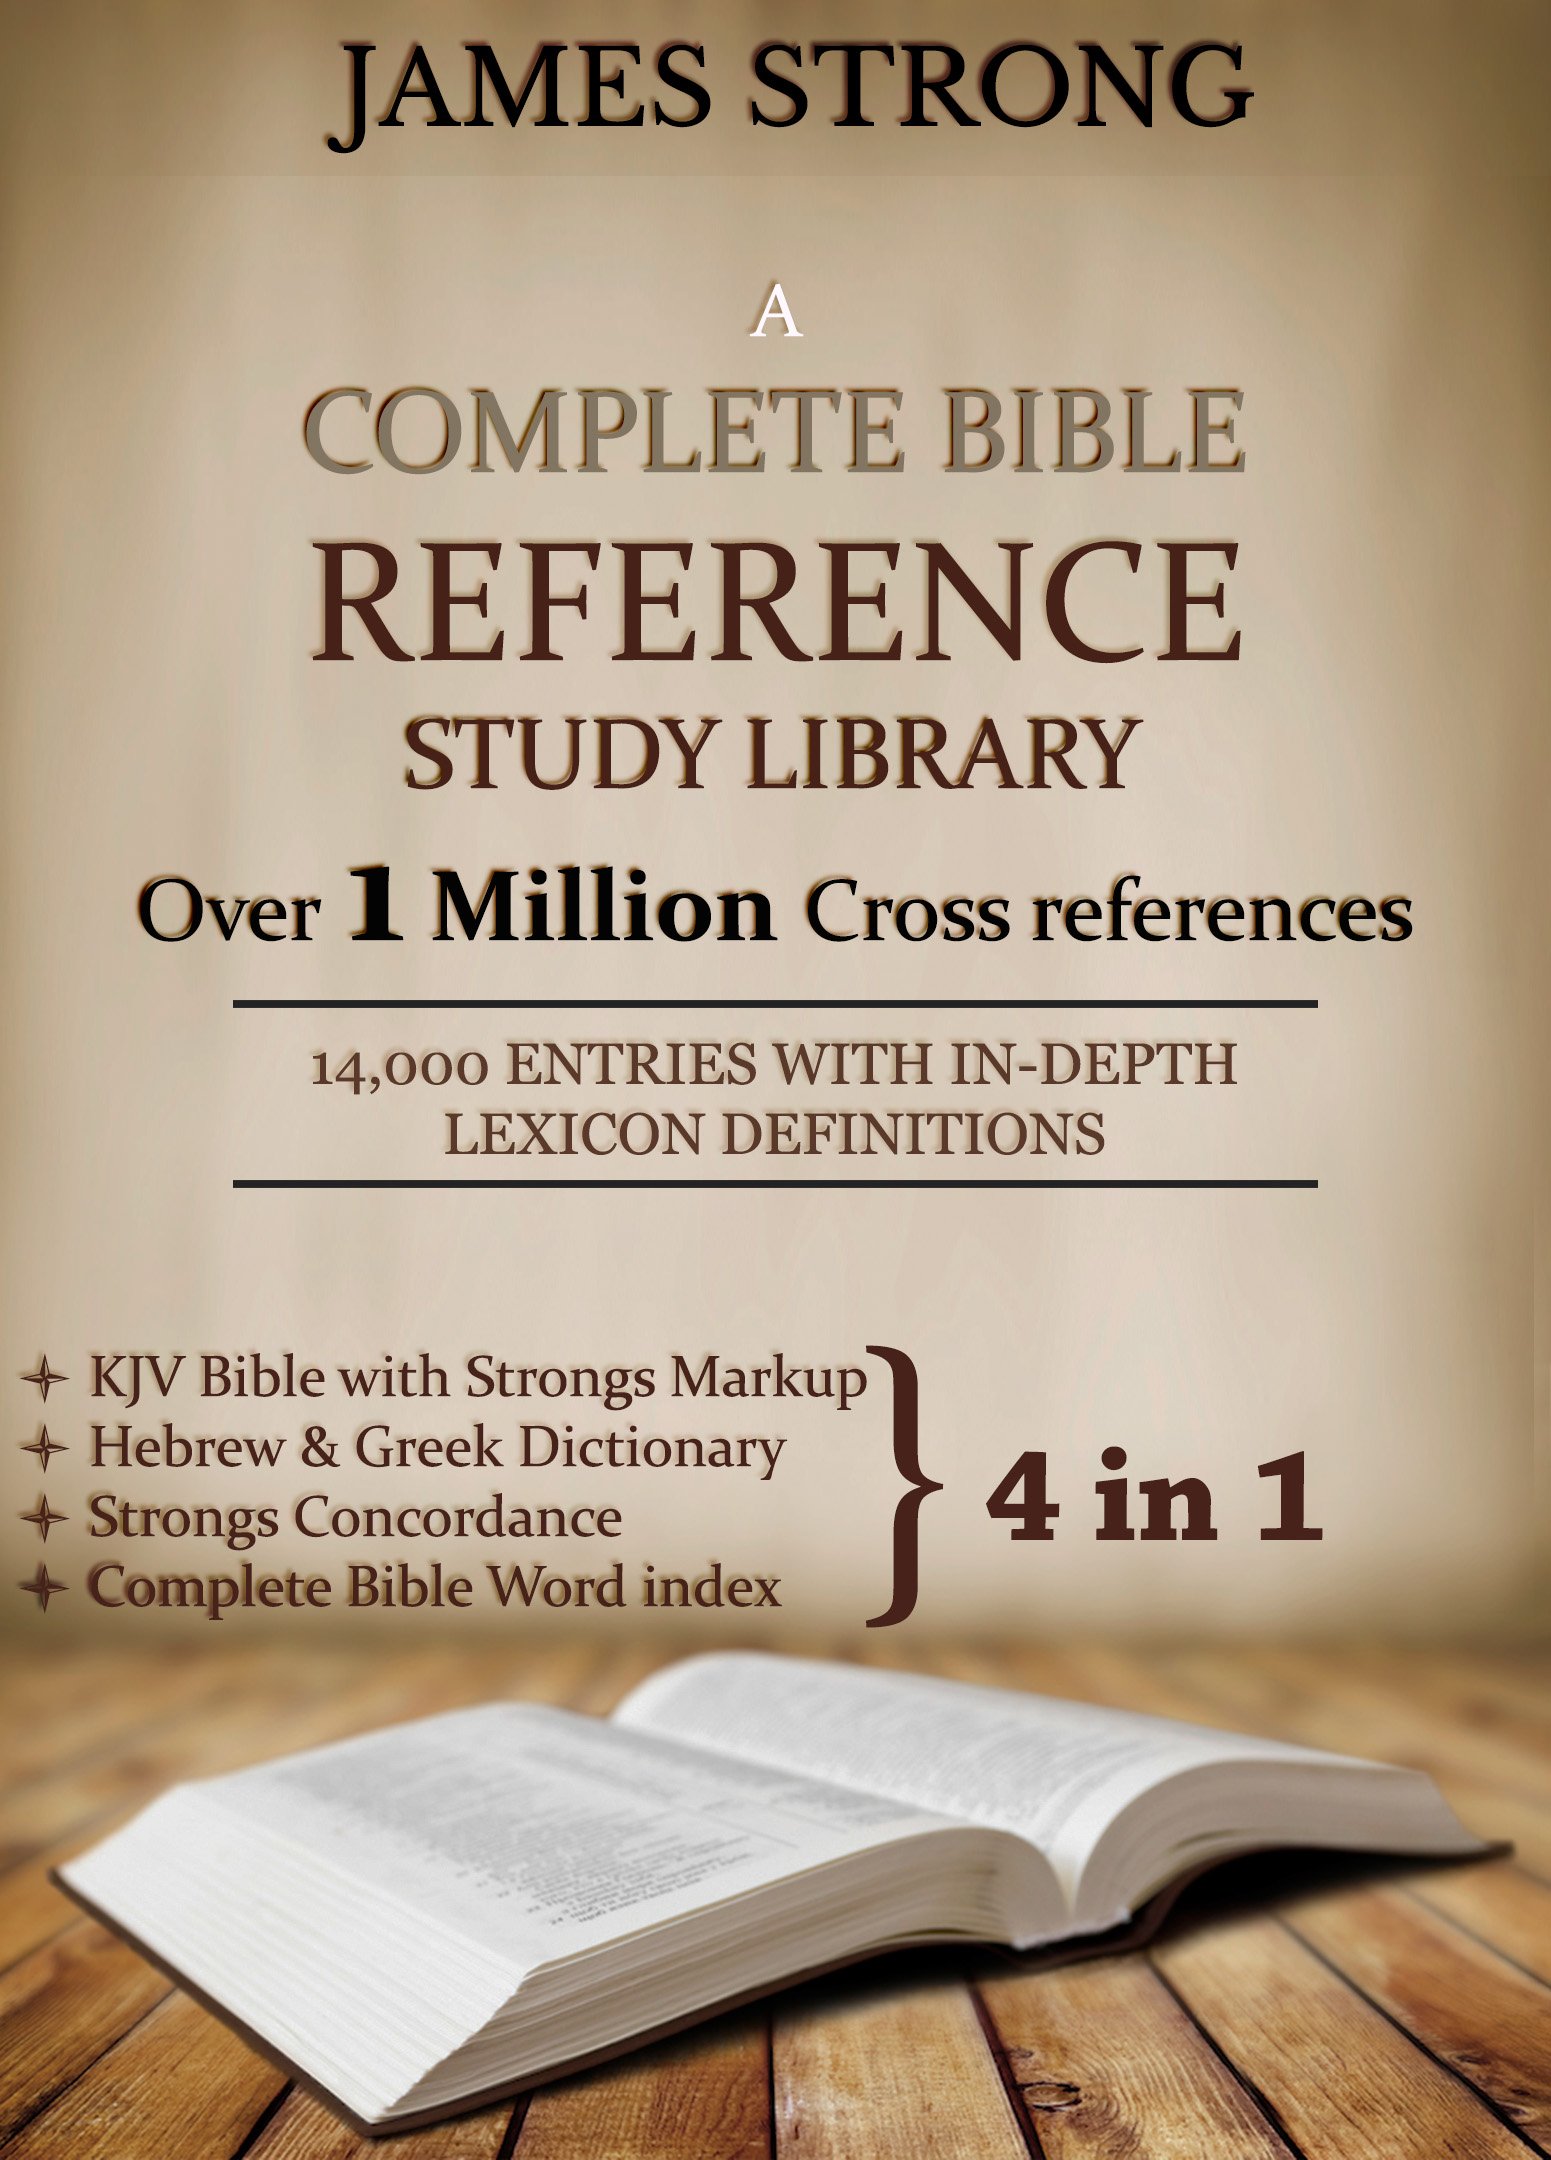 A Complete Bible Reference Study Library (4 in 1): [Illustrated]: KJV Bible with Strongs markup, Strongs Concordance & Dictionaries, Lexicon Definitions, and Bible word index